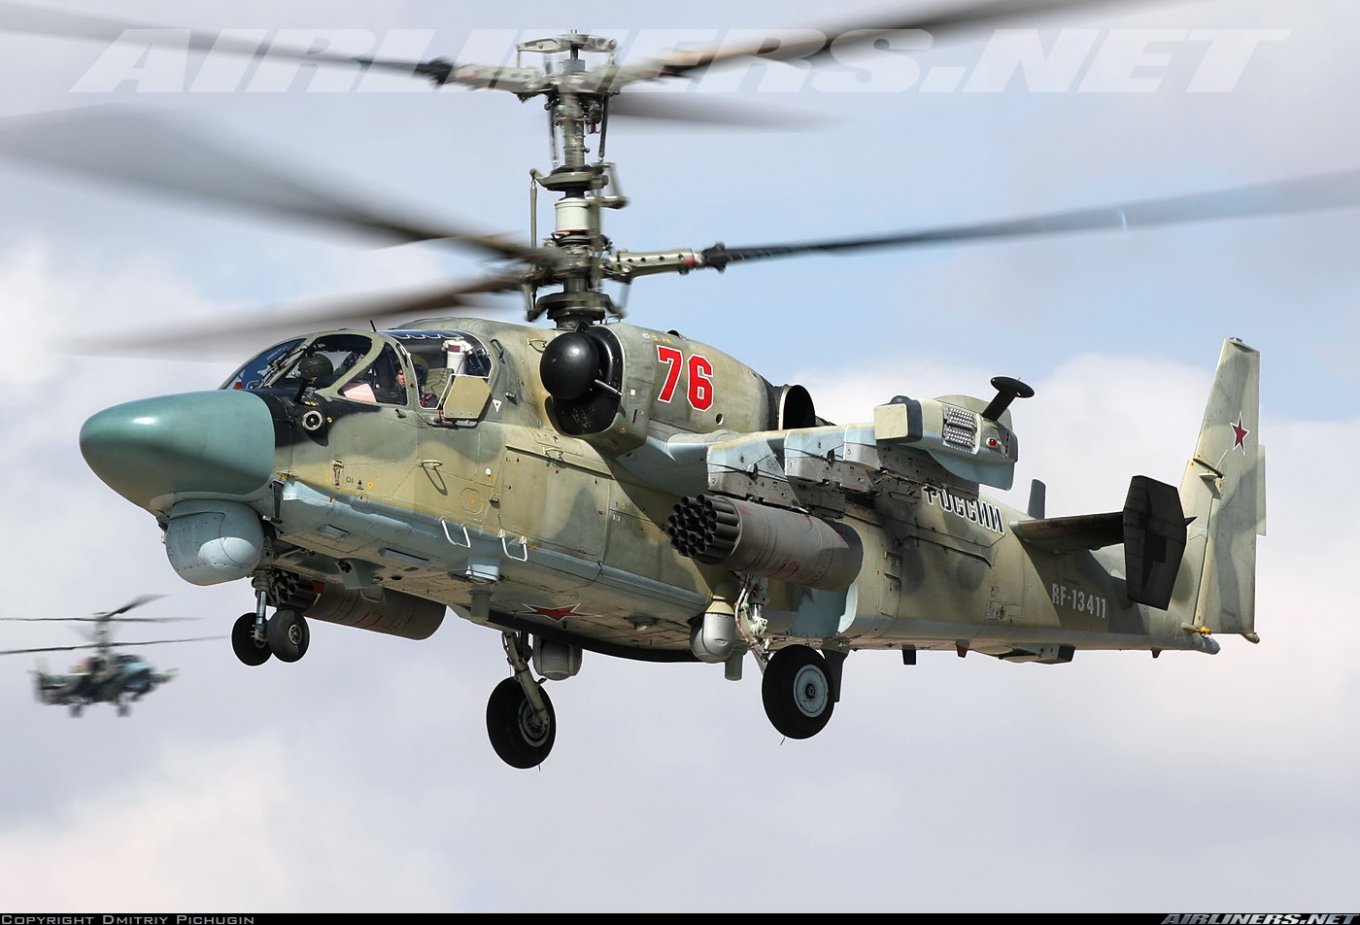 Russian Ka-52 helicopters, with tail number 76 “red” (RF-13411), being shot down by Ukrainian air defenses on Wednesday, March 16, Defense Express